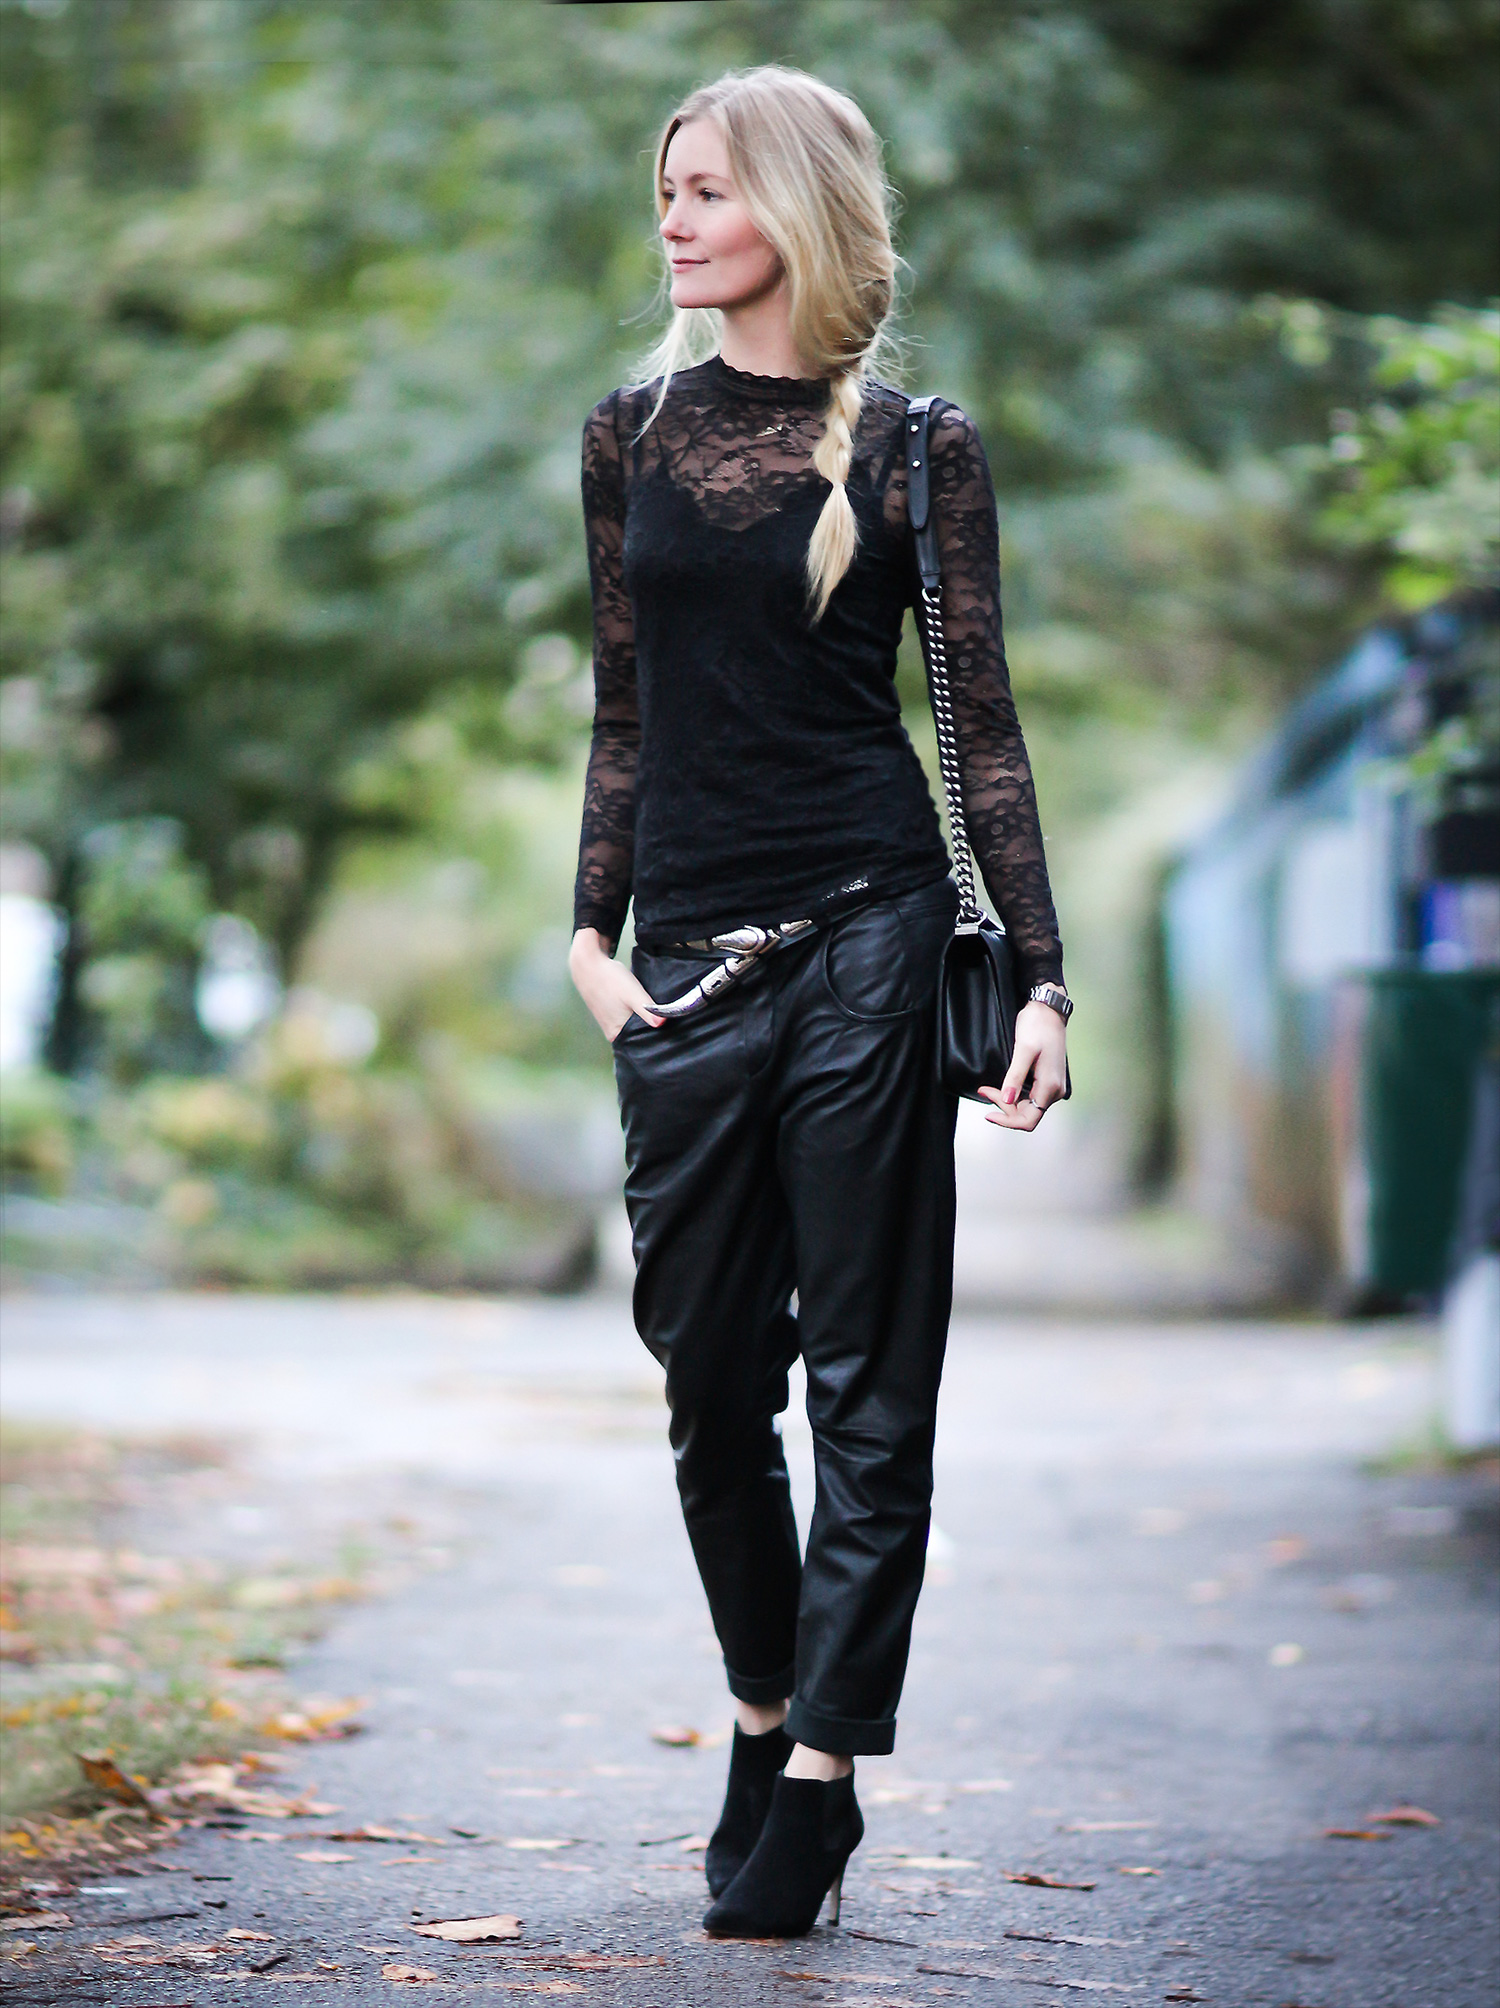 Lace & leather - Christina Dueholm